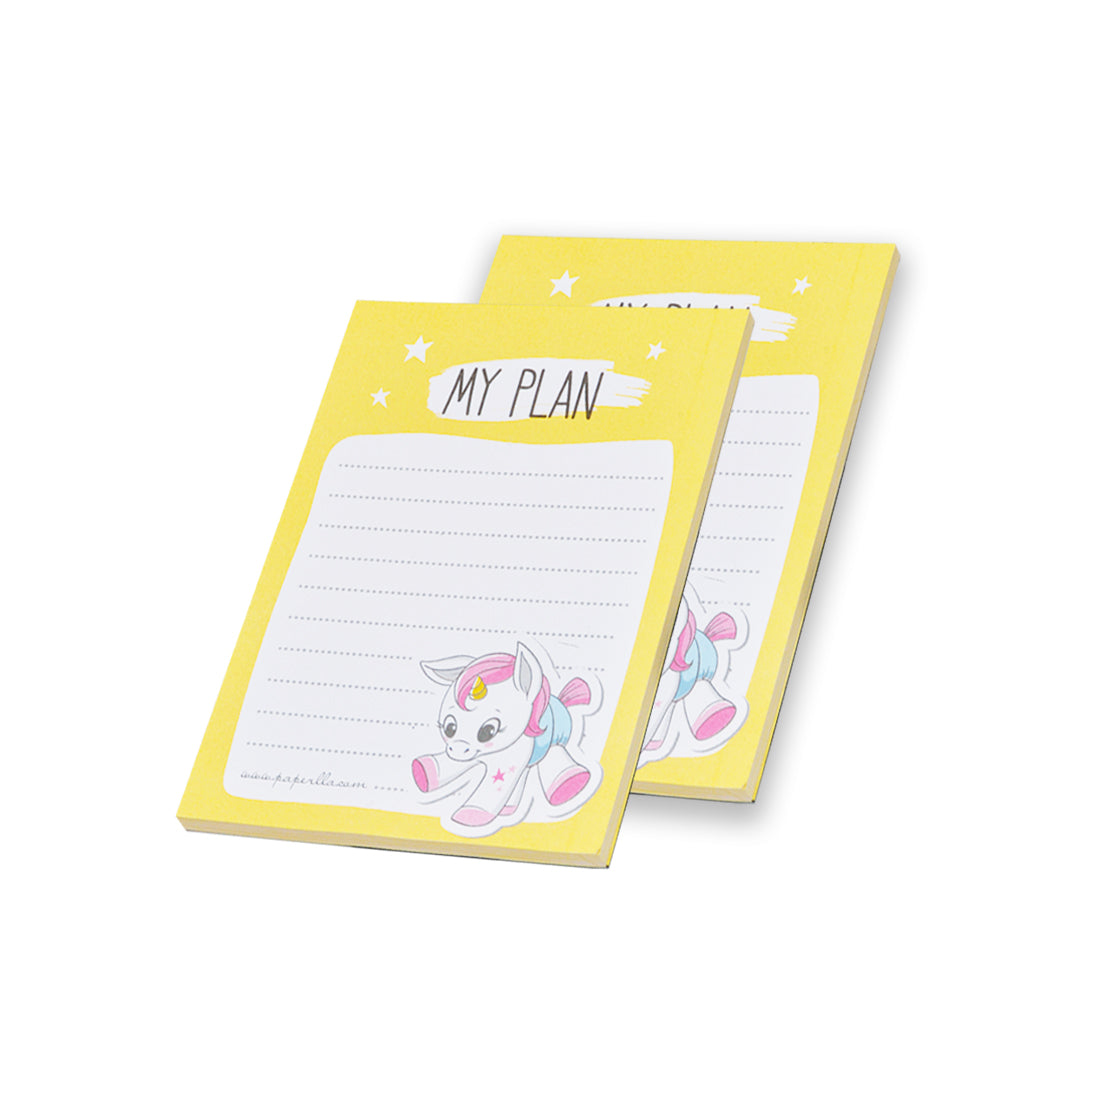 PLANNER TO DO LSIT , DIARIES NOTEBOOK FOR WOMEN FAREWELL GIFT FOR COLLEAGUES SET OF 4